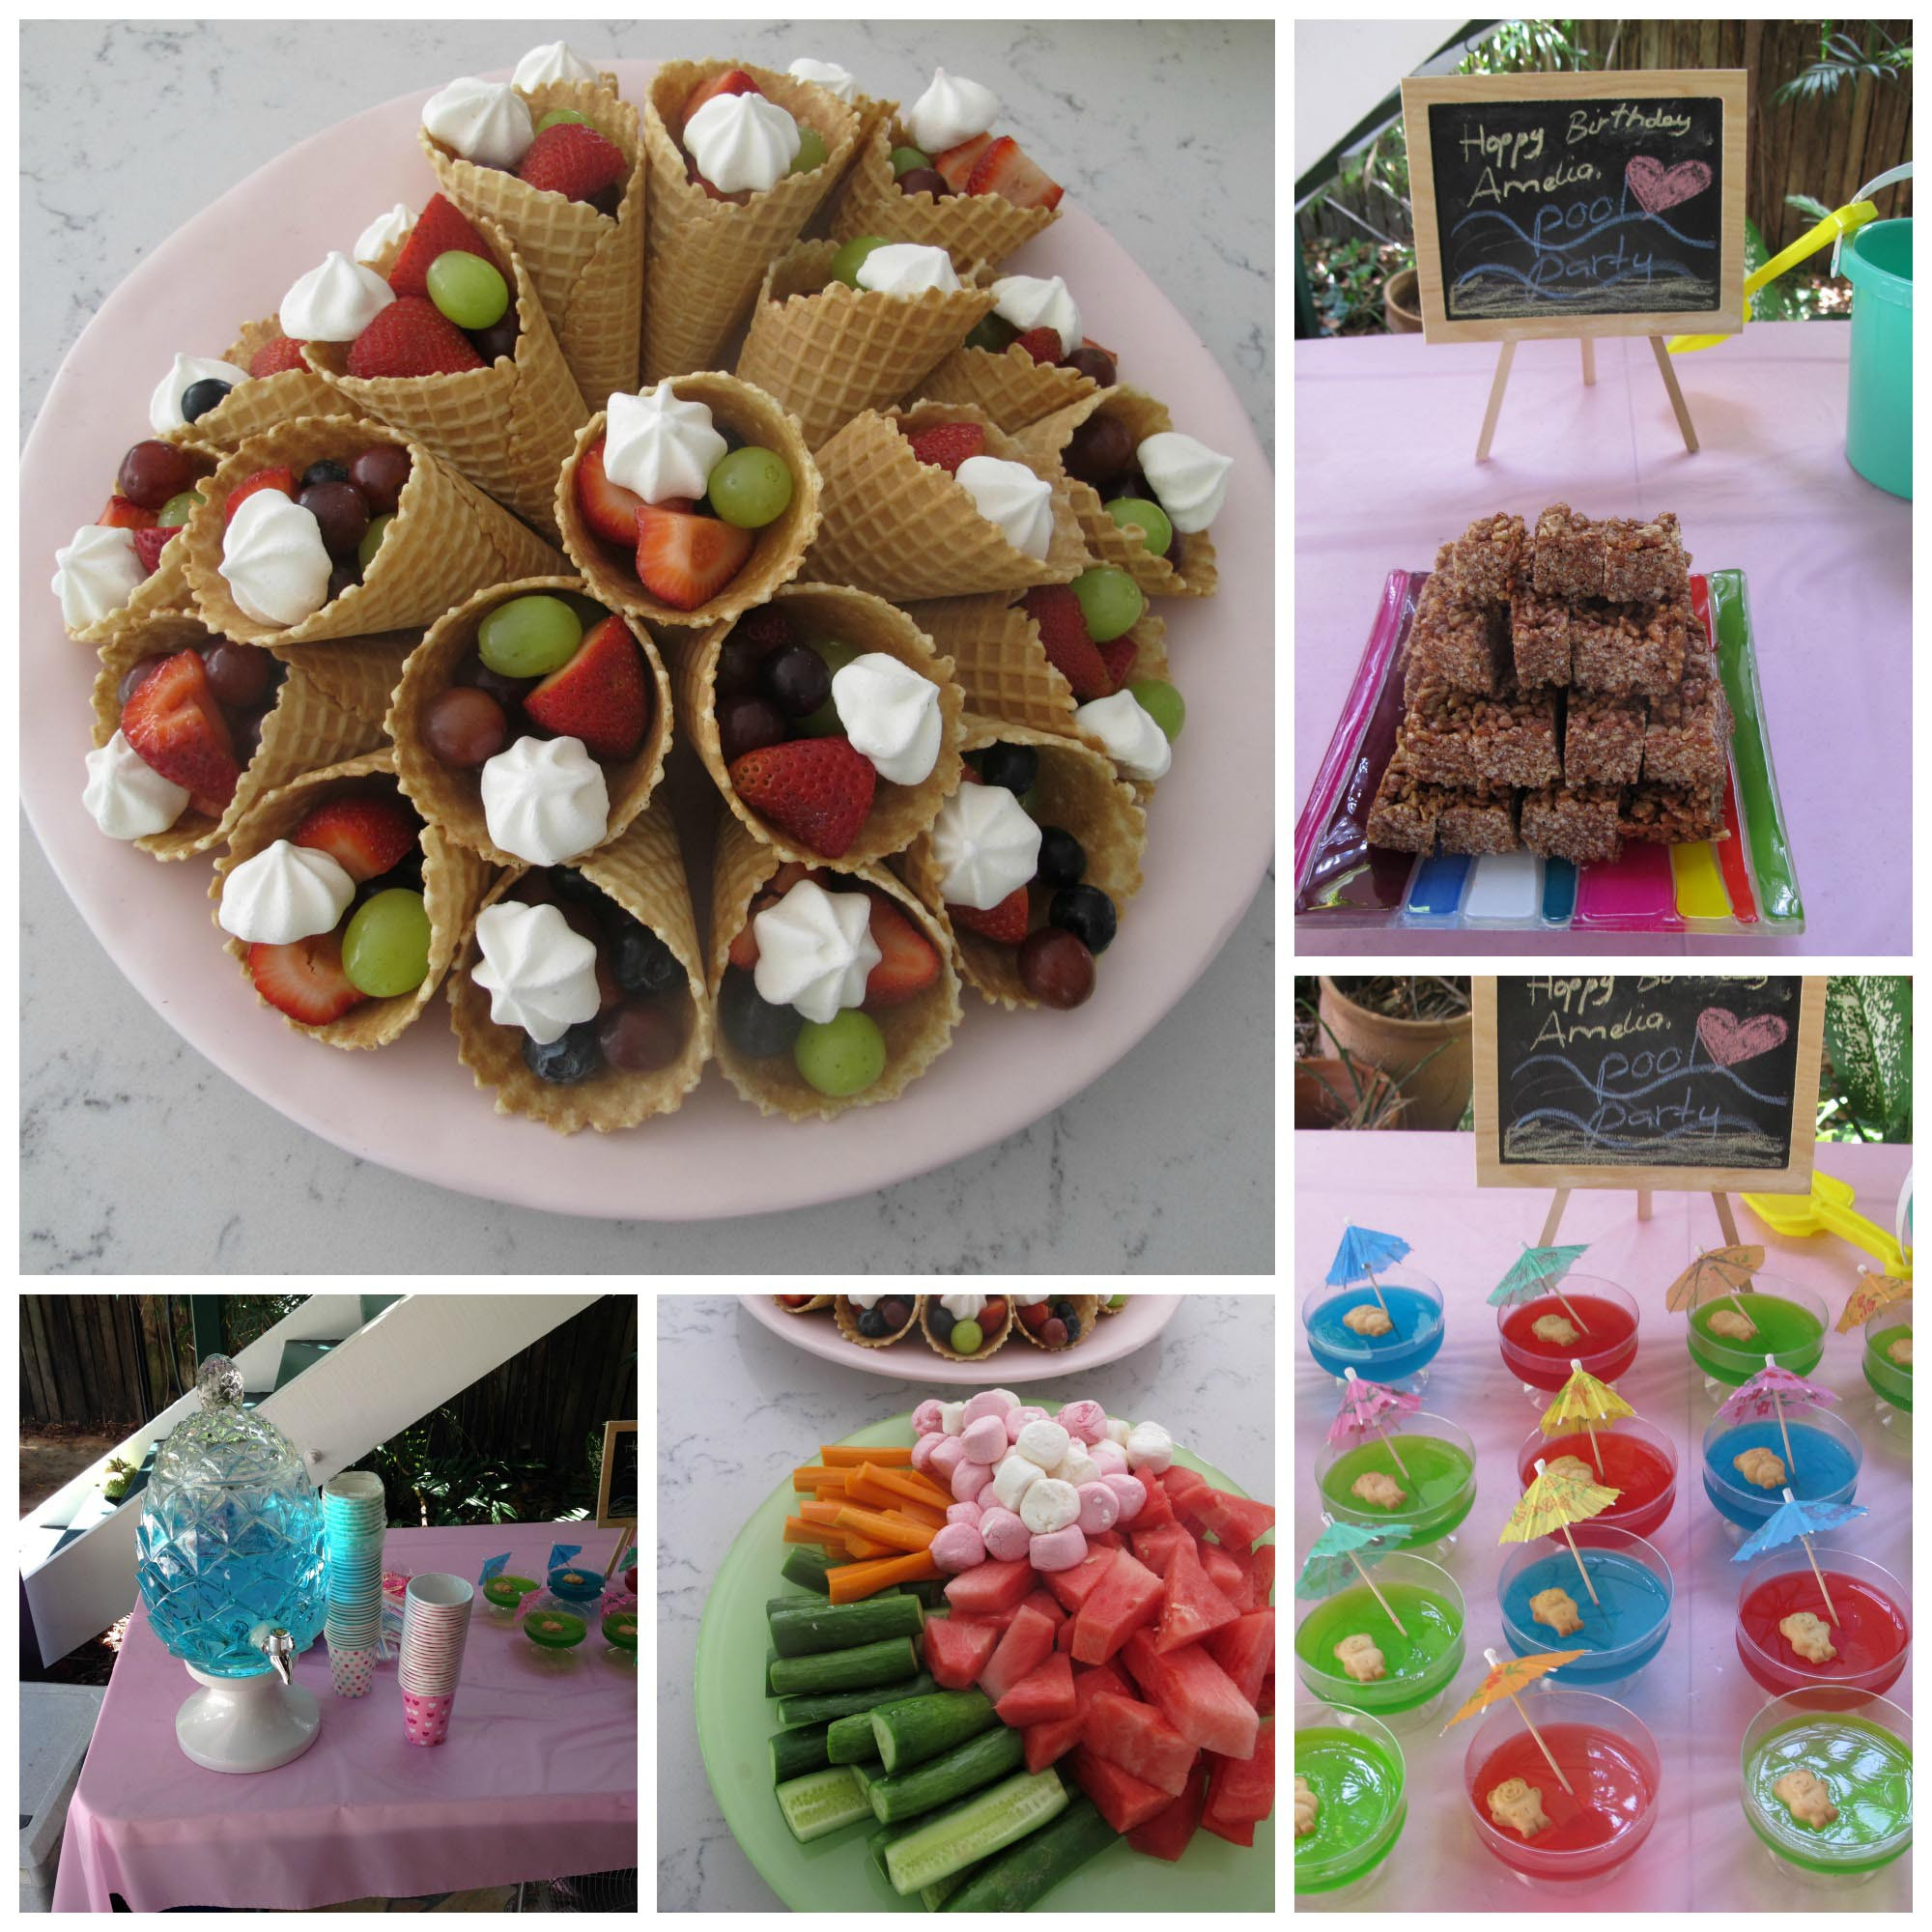 Kids Pool Party Food Ideas
 The Perfect Kids Pool Party